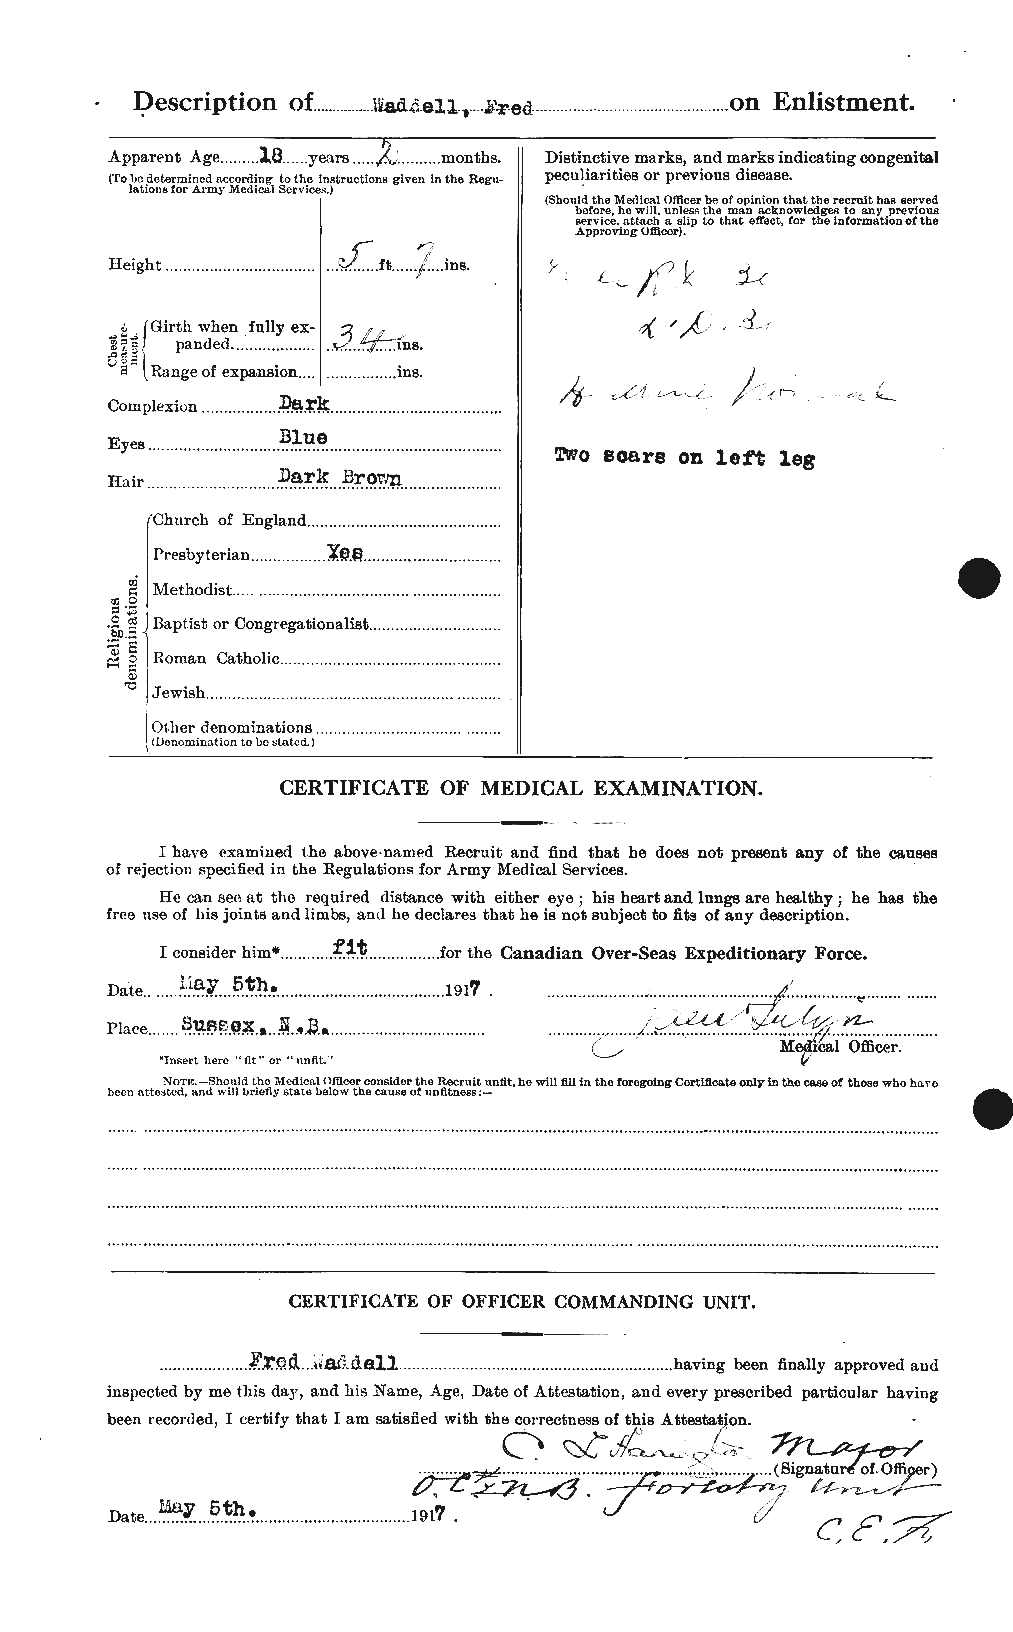 Personnel Records of the First World War - CEF 649834b